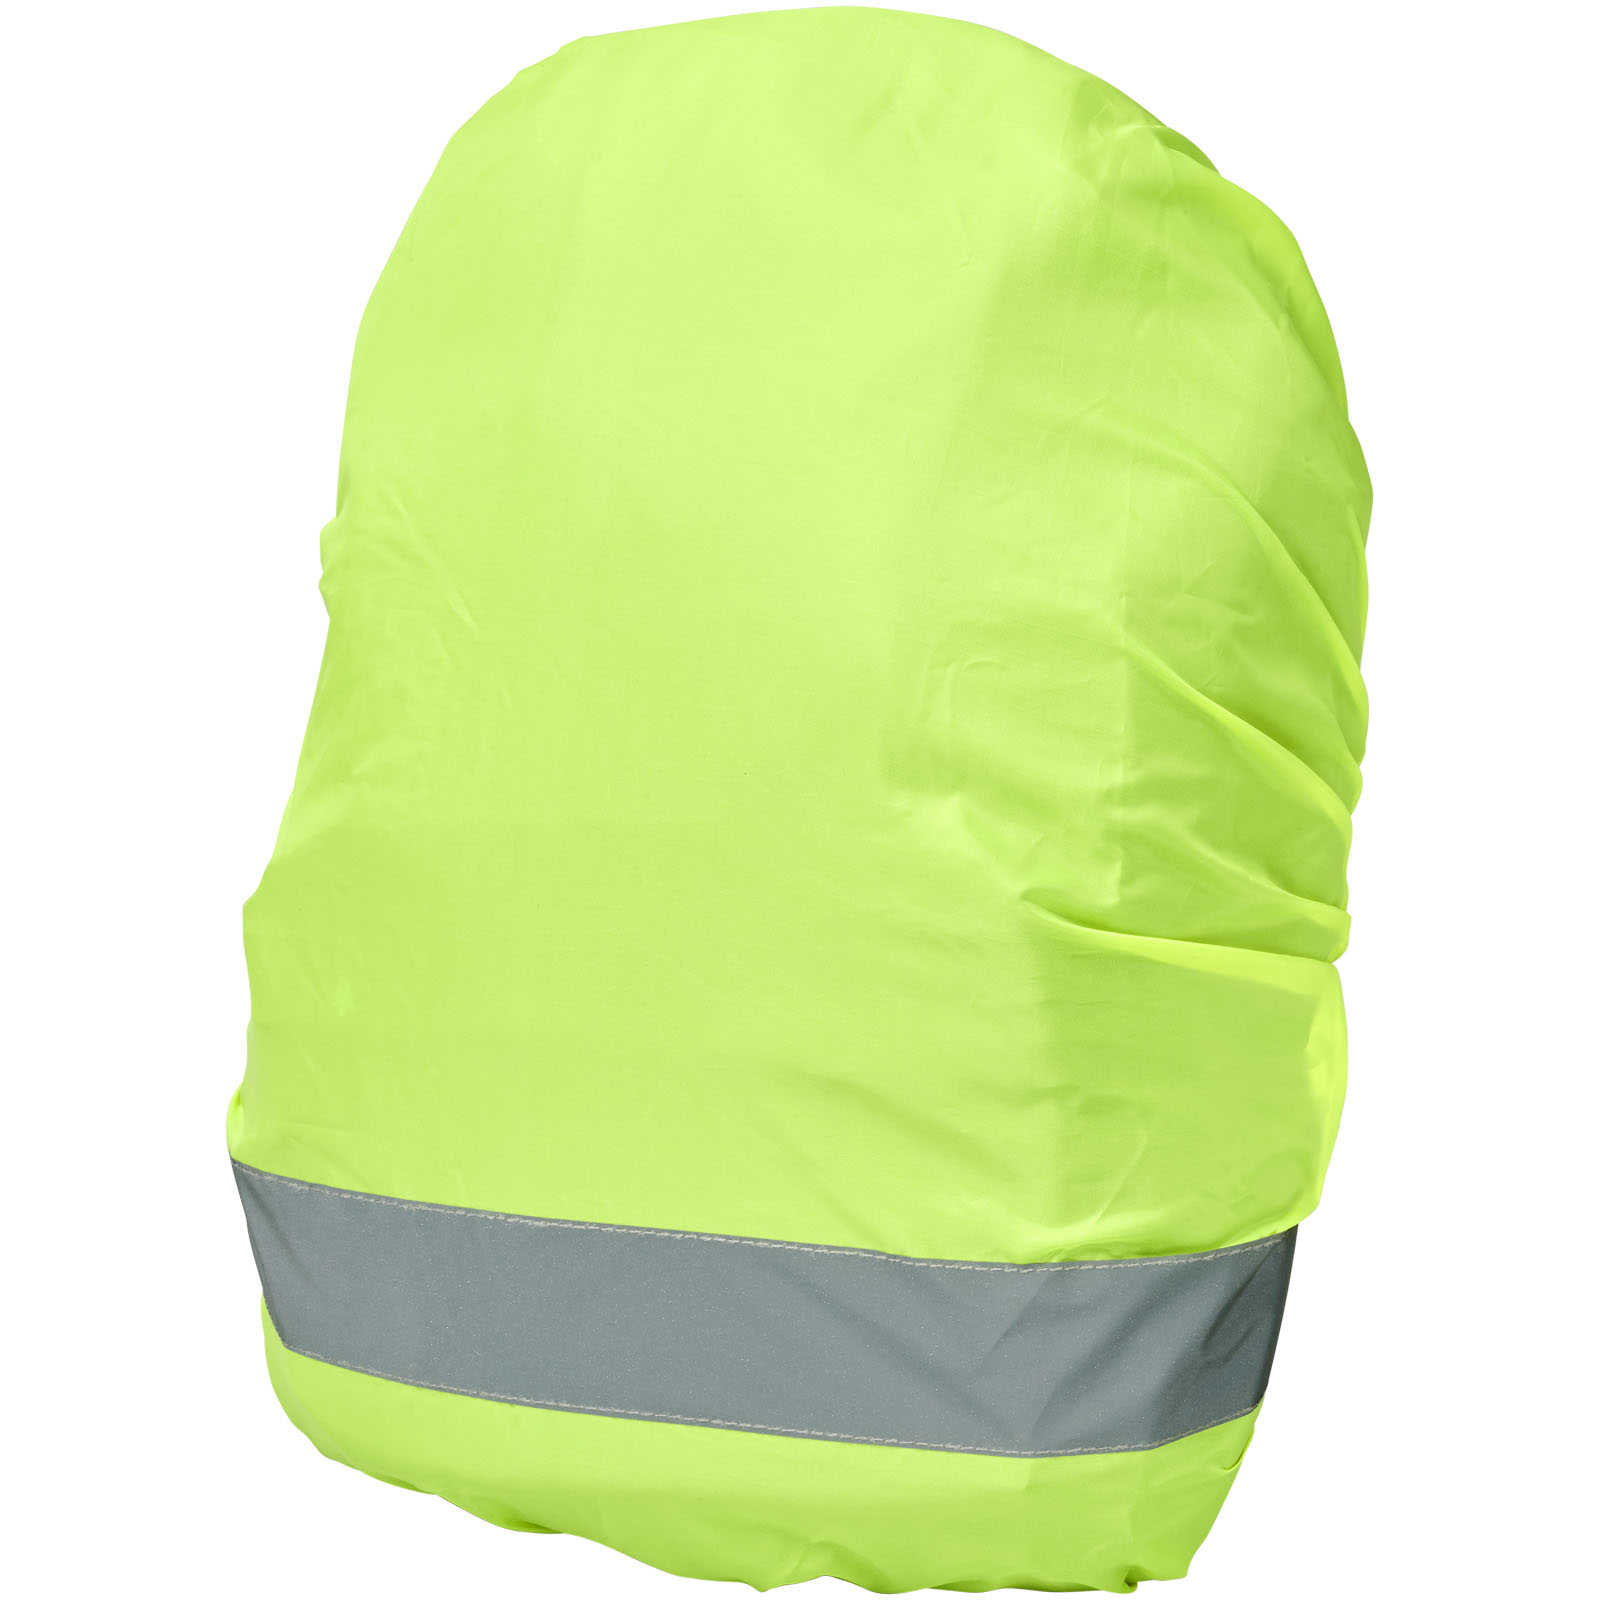 Advertising Reflective Items - RFX™ William reflective and waterproof bag cover - 0